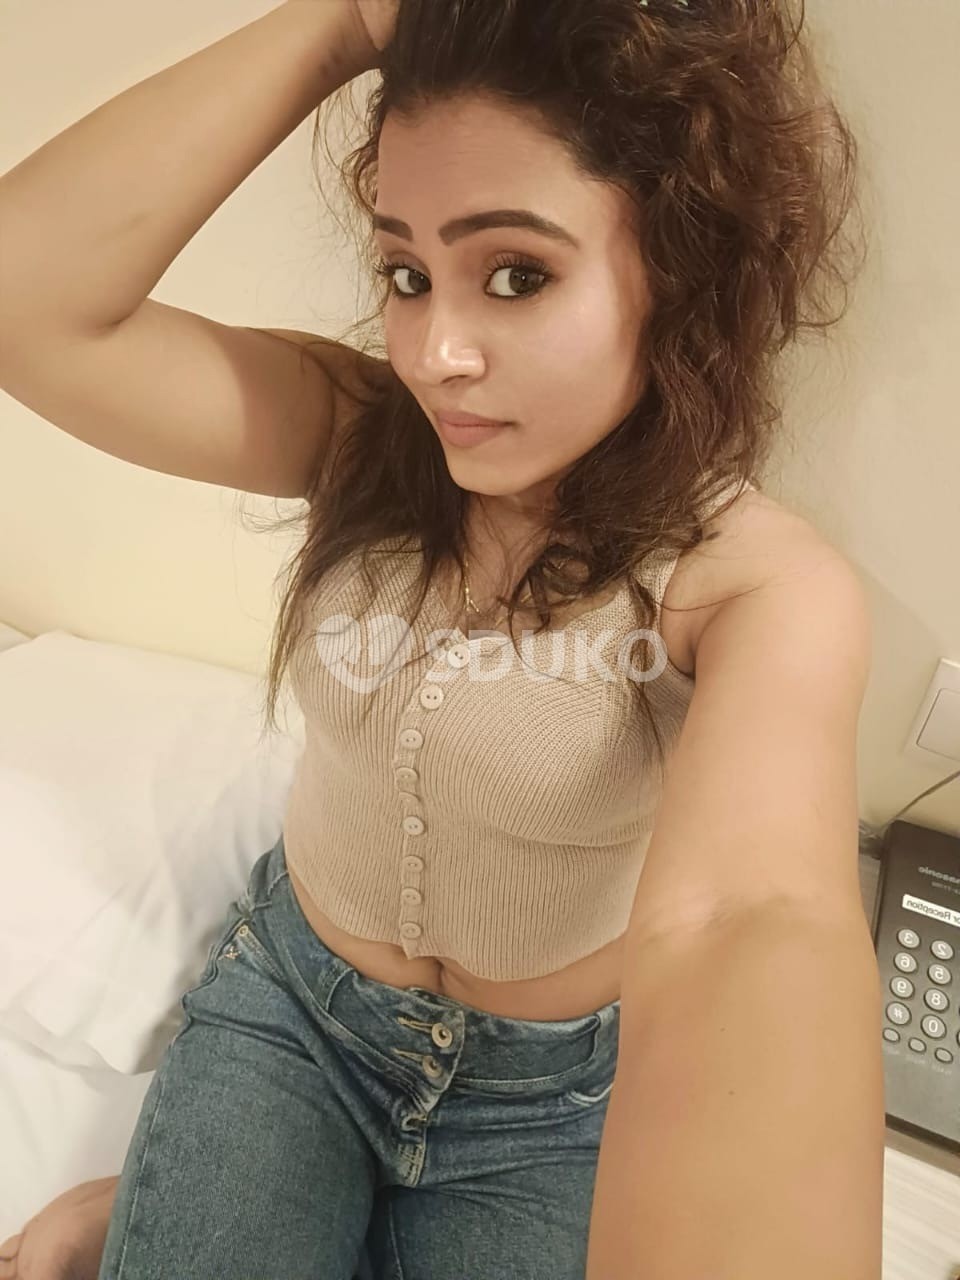 Panaji 🥰❣️✅100% SAFE AND SECURE TODAY LOW PRICE UNLIMITED ENJOY HOT COLLEGE GIRL HOUSEWIFE AUNTIES AVAILABLE AL